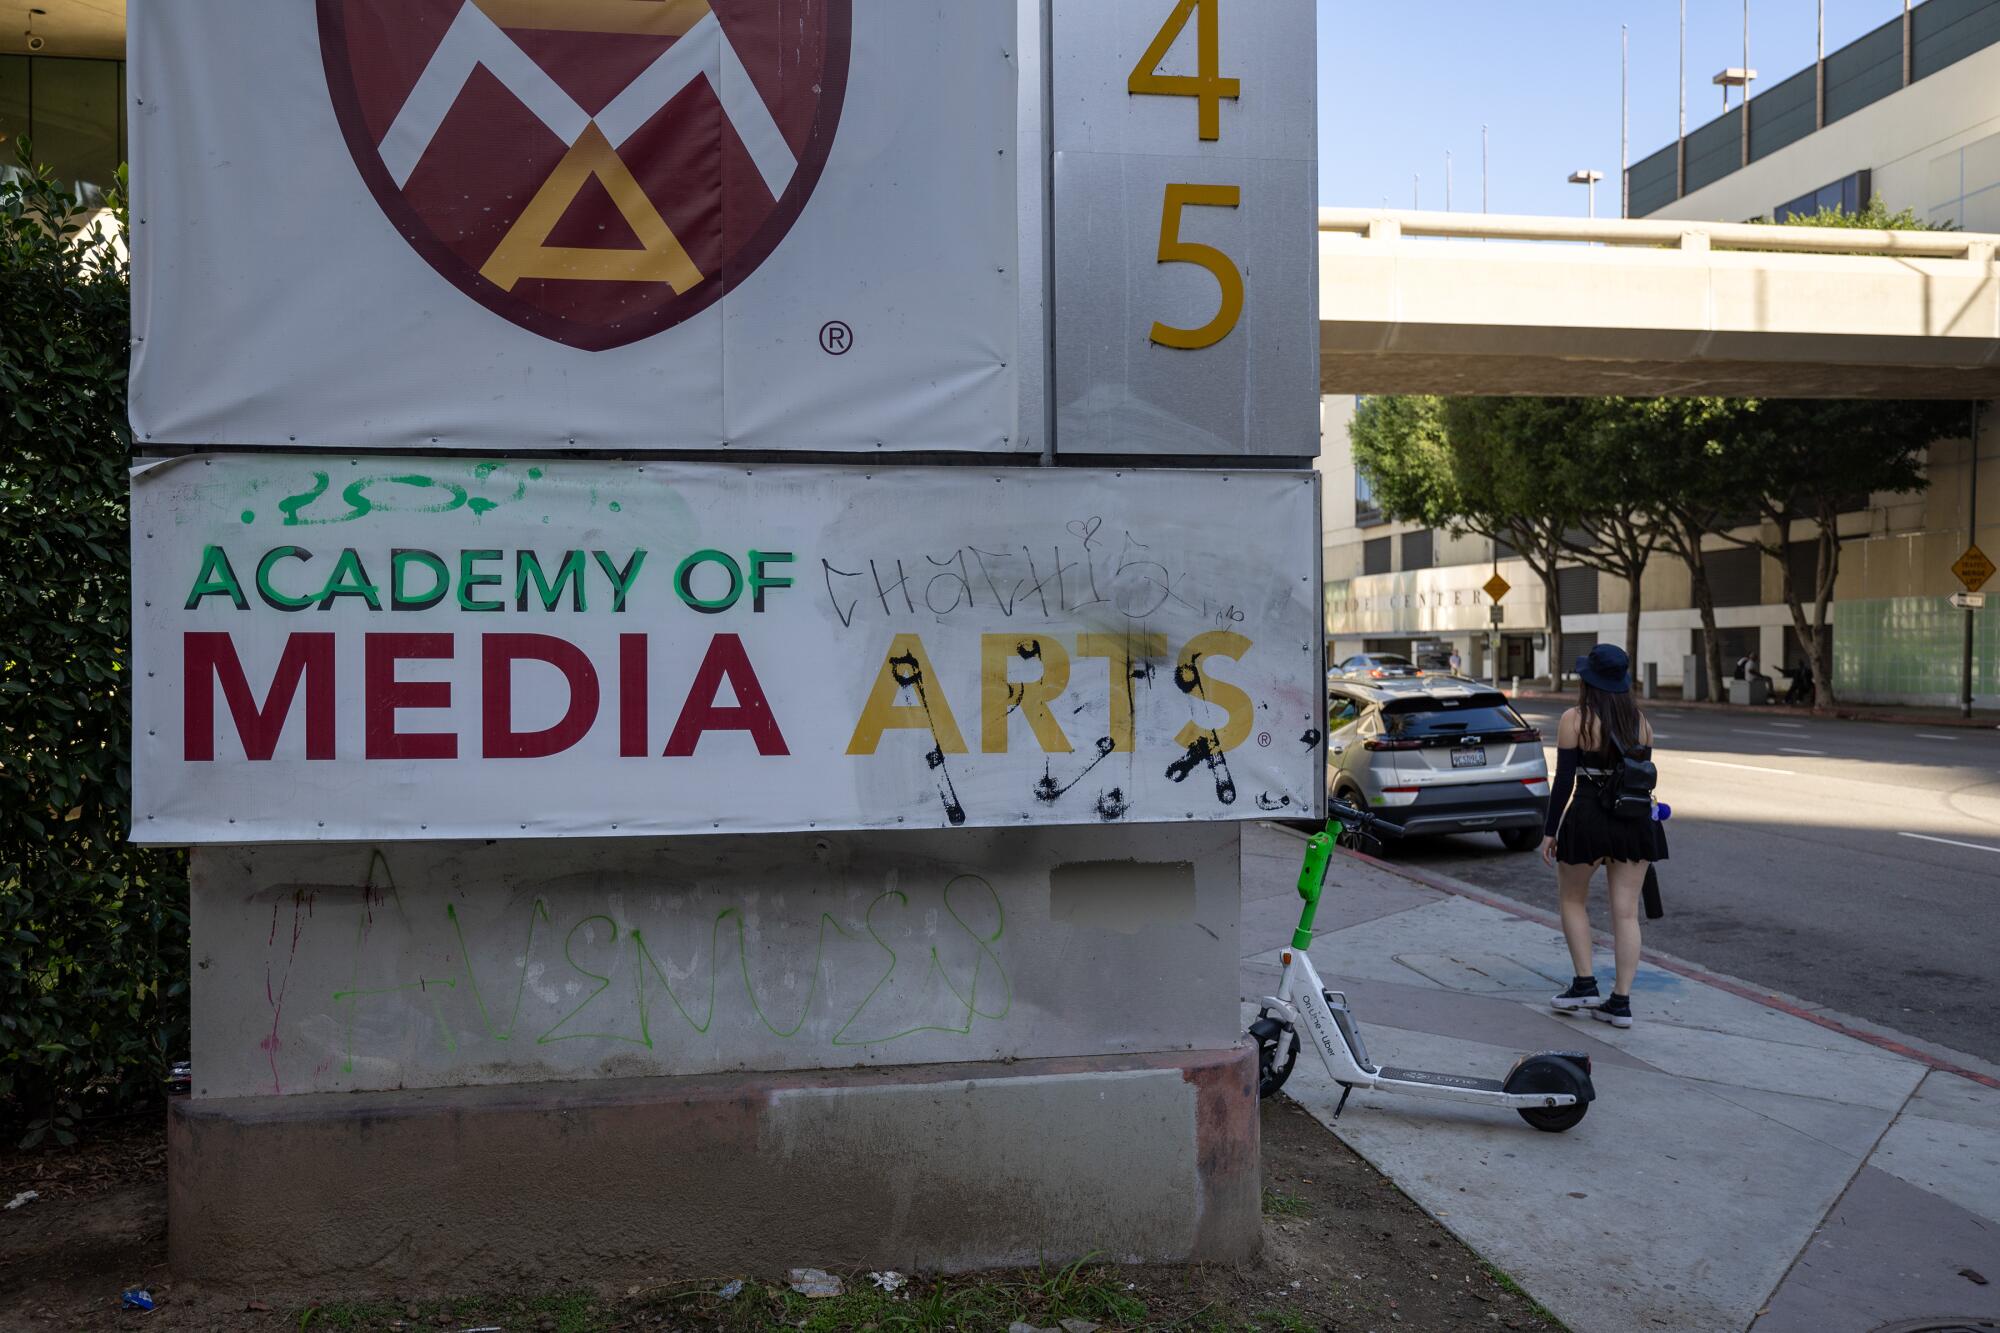  Graffiti on a school sign, trash and an abandoned scooter in front of the Academy of Media Arts school.